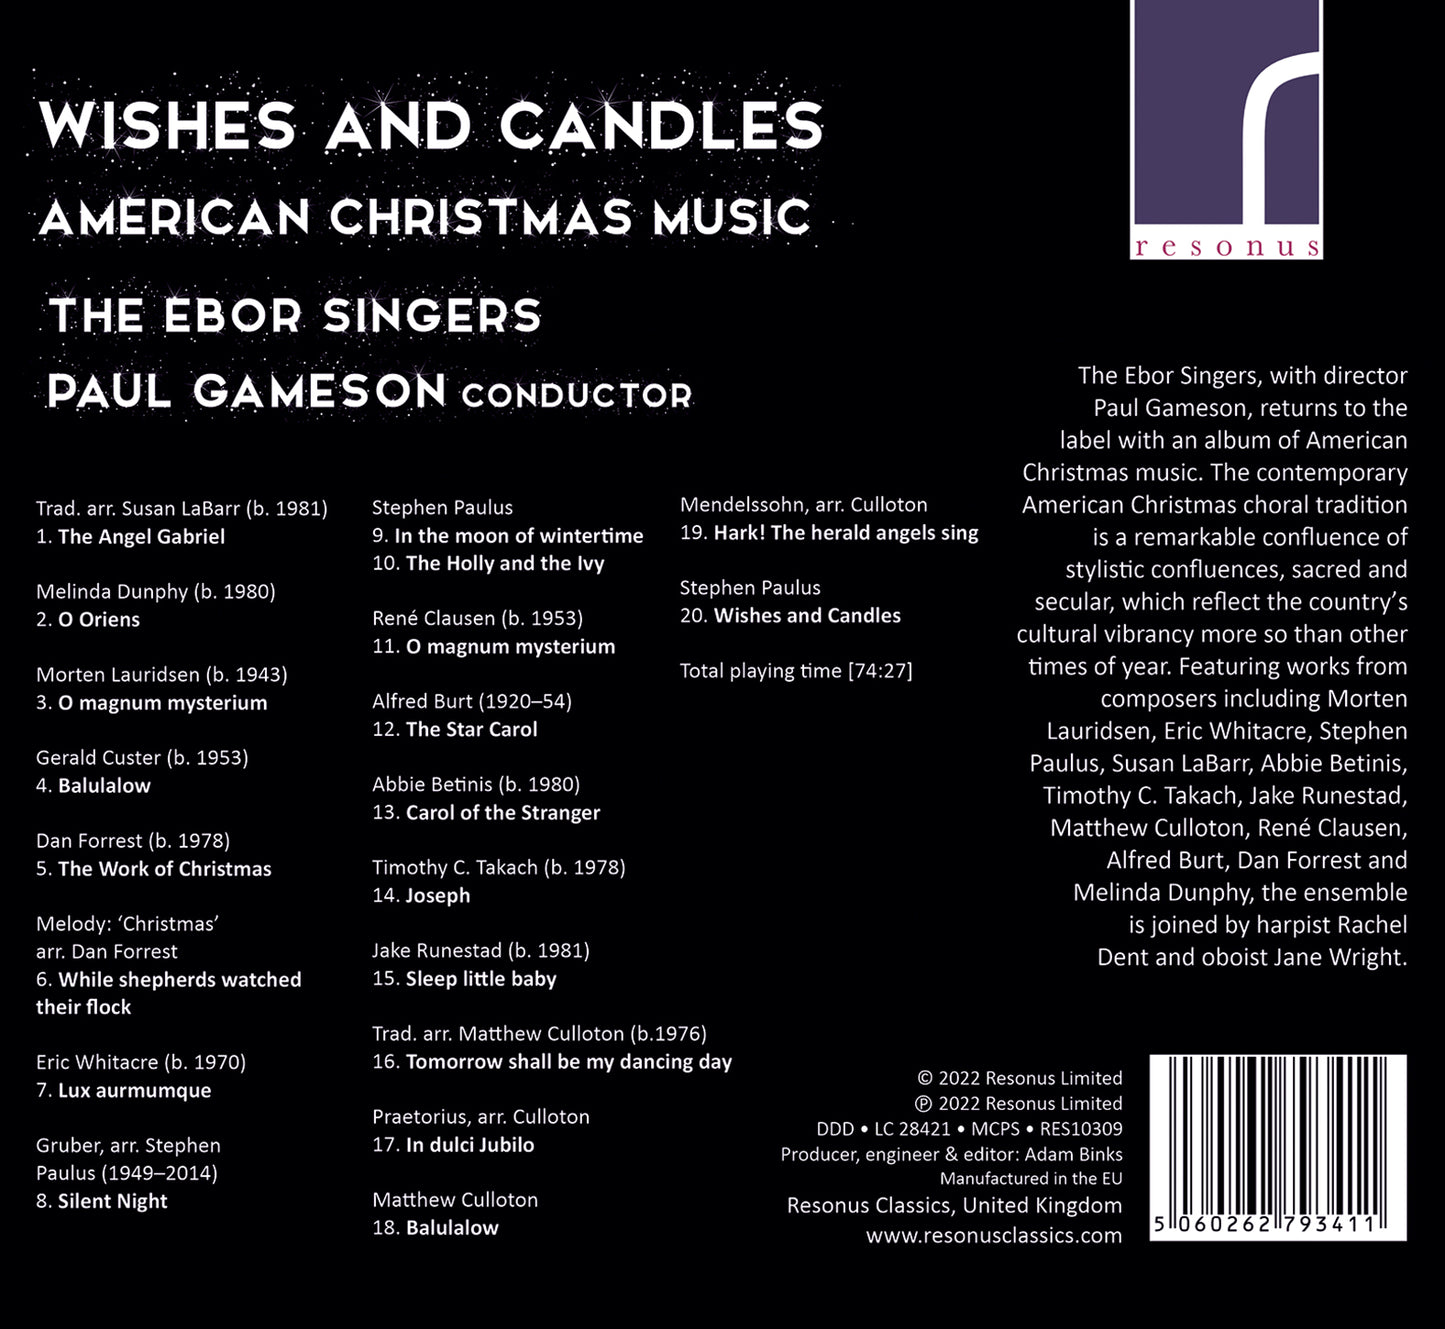 Wishes & Candles - American Christmas Music / The Ebor Singers